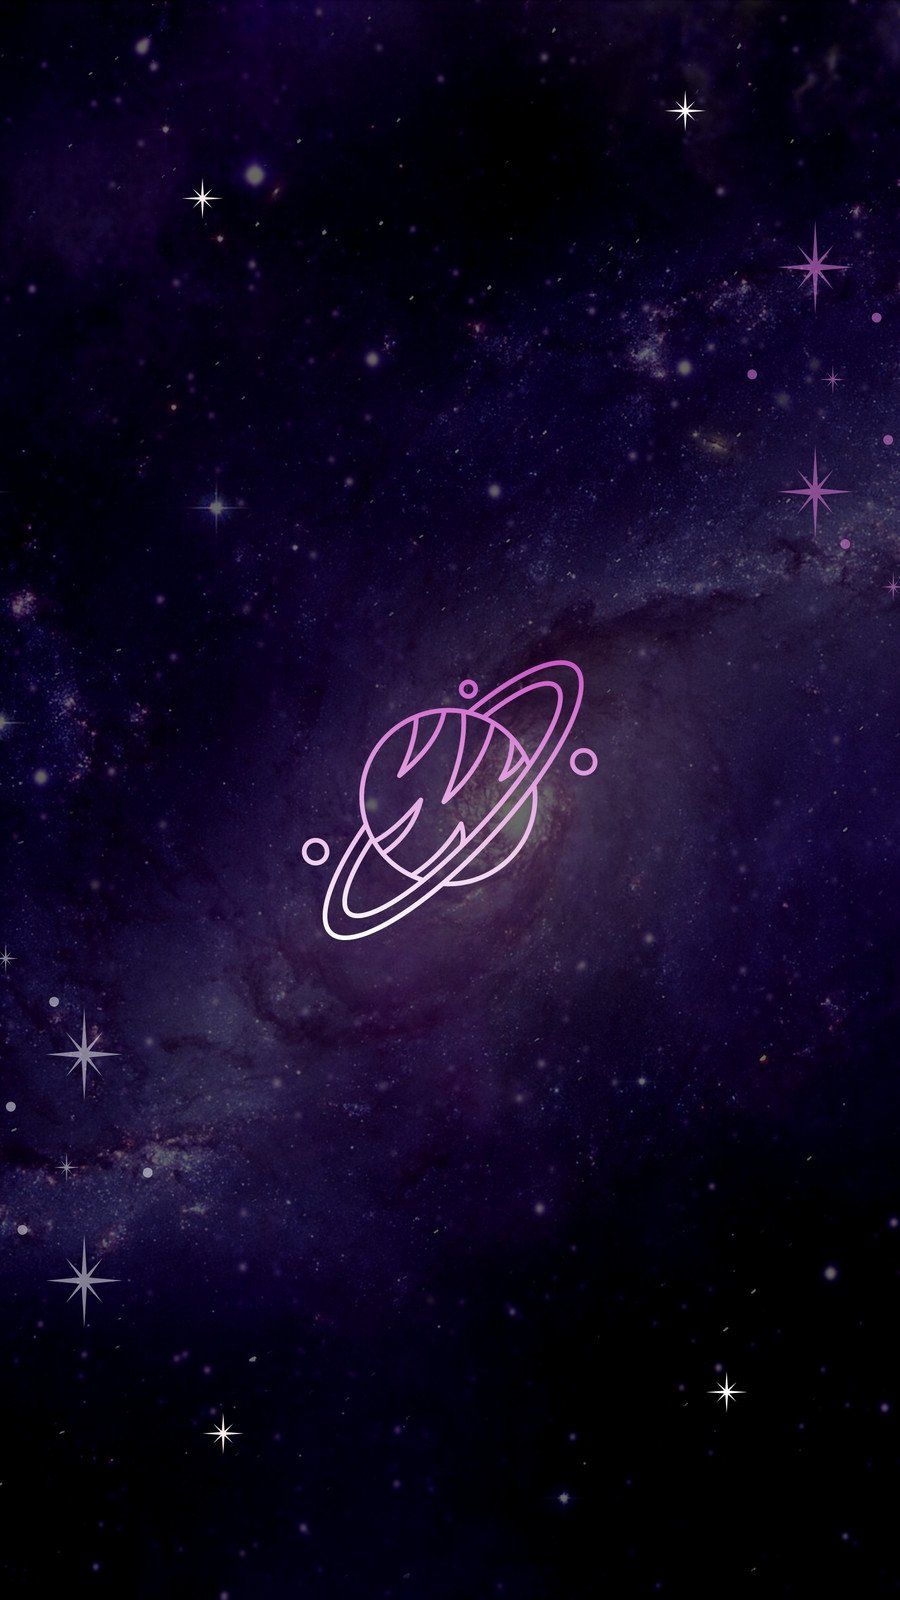 IPhone wallpaper of a purple planet in outer space - Constellation